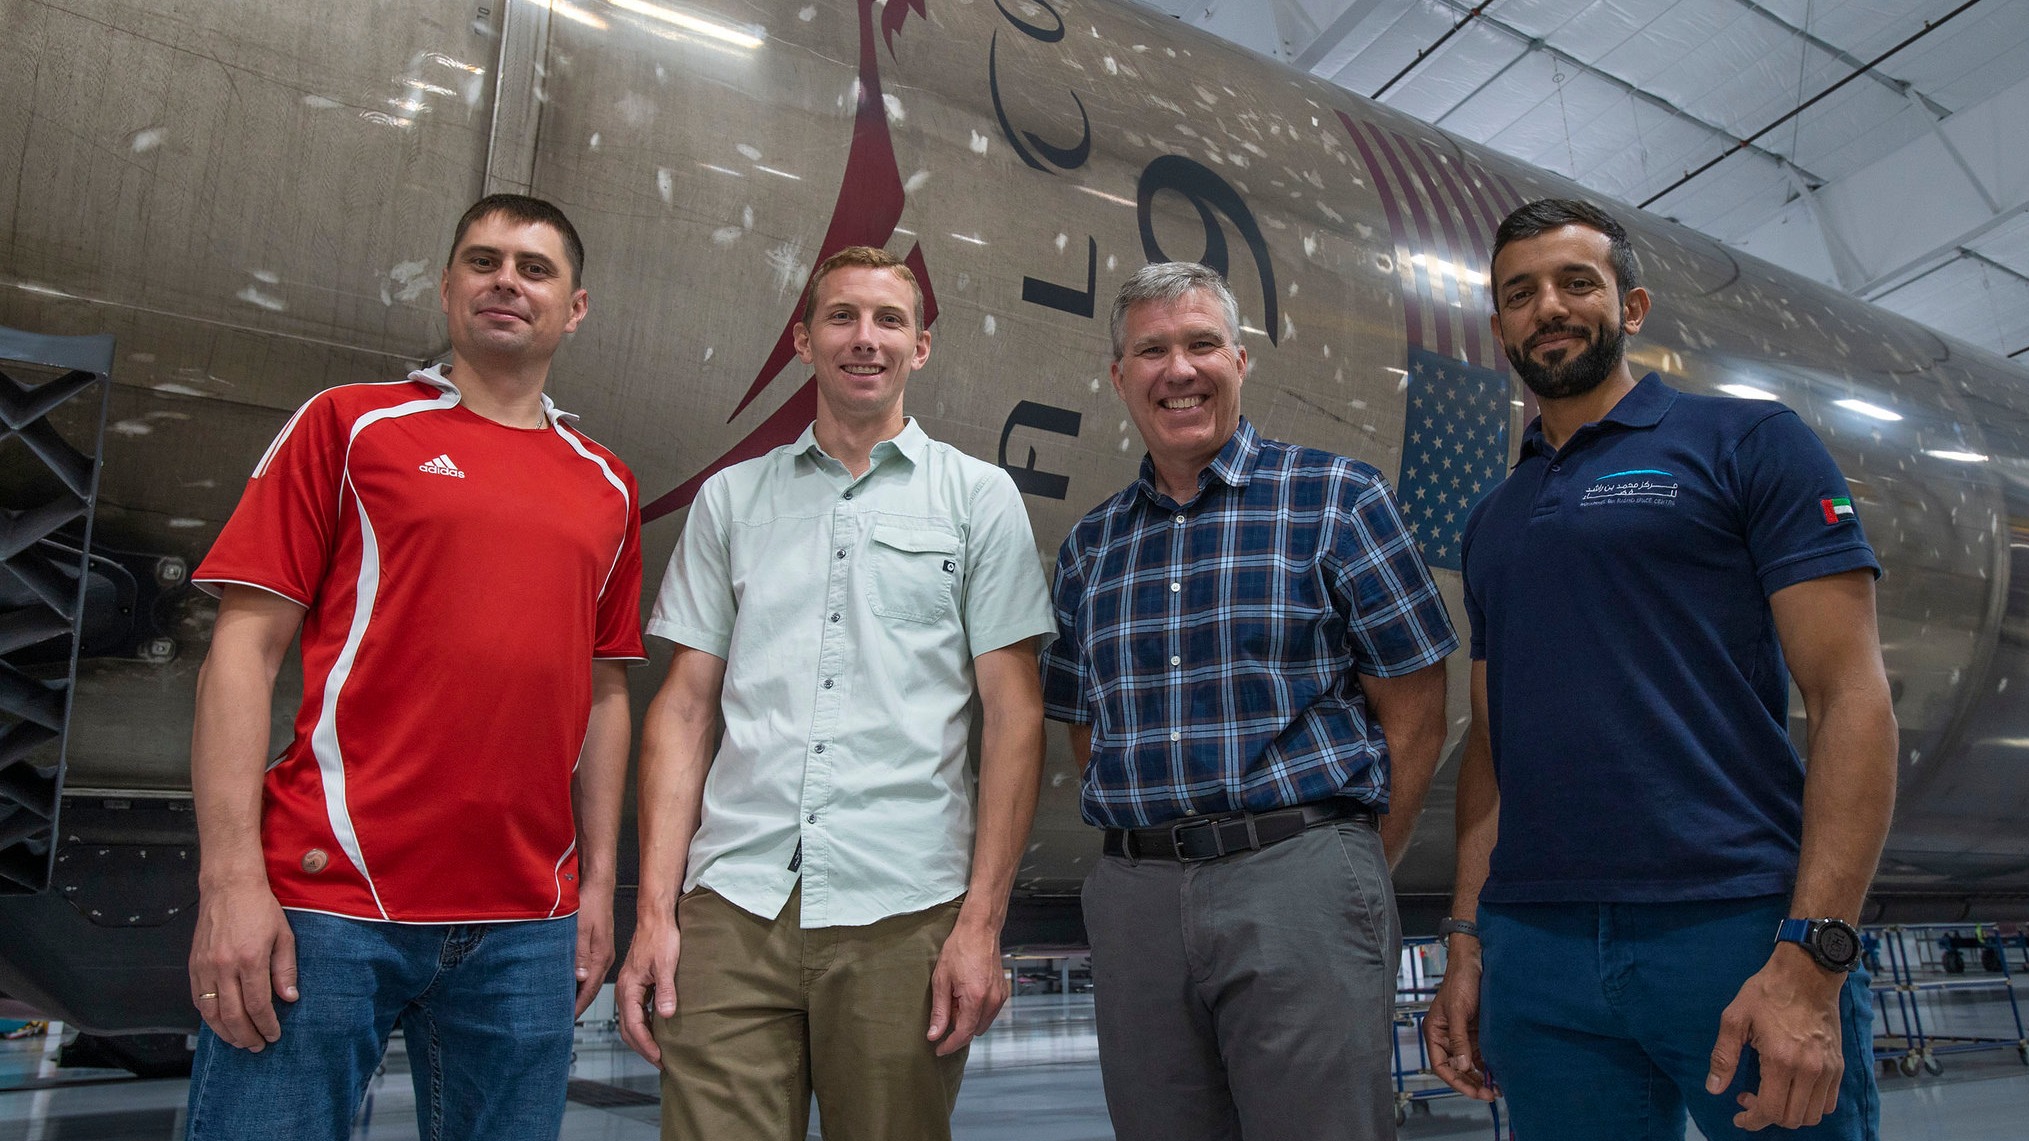 The next crewed launch to the International Space Station will be Crew-6, a NASA rotation mission flown in a SpaceX spacecraft. From left are Russia's Andrey Fedyaev, NASA's Warren "Woody" Hoburg, NASA's Stephen Bowen, and the United Arab Emirates' Sultan Al Neyadi in front of a SpaceX Falcon 9 rocket.